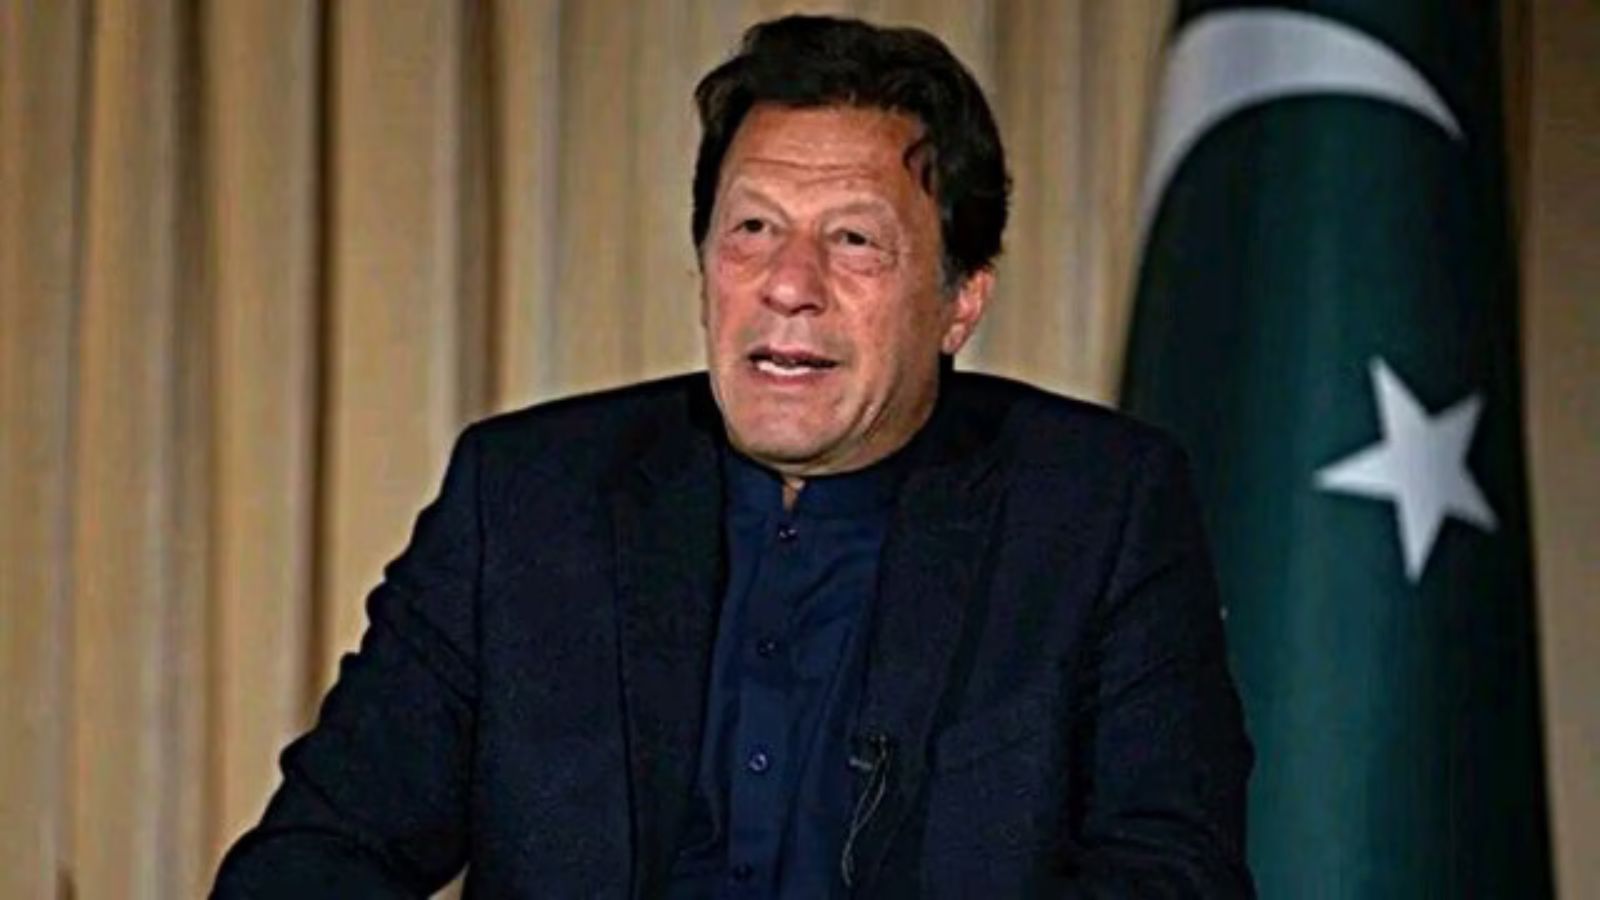 Imran Khan accuses Pakistani Chief Justice Isa of acting biased against his party |  World News